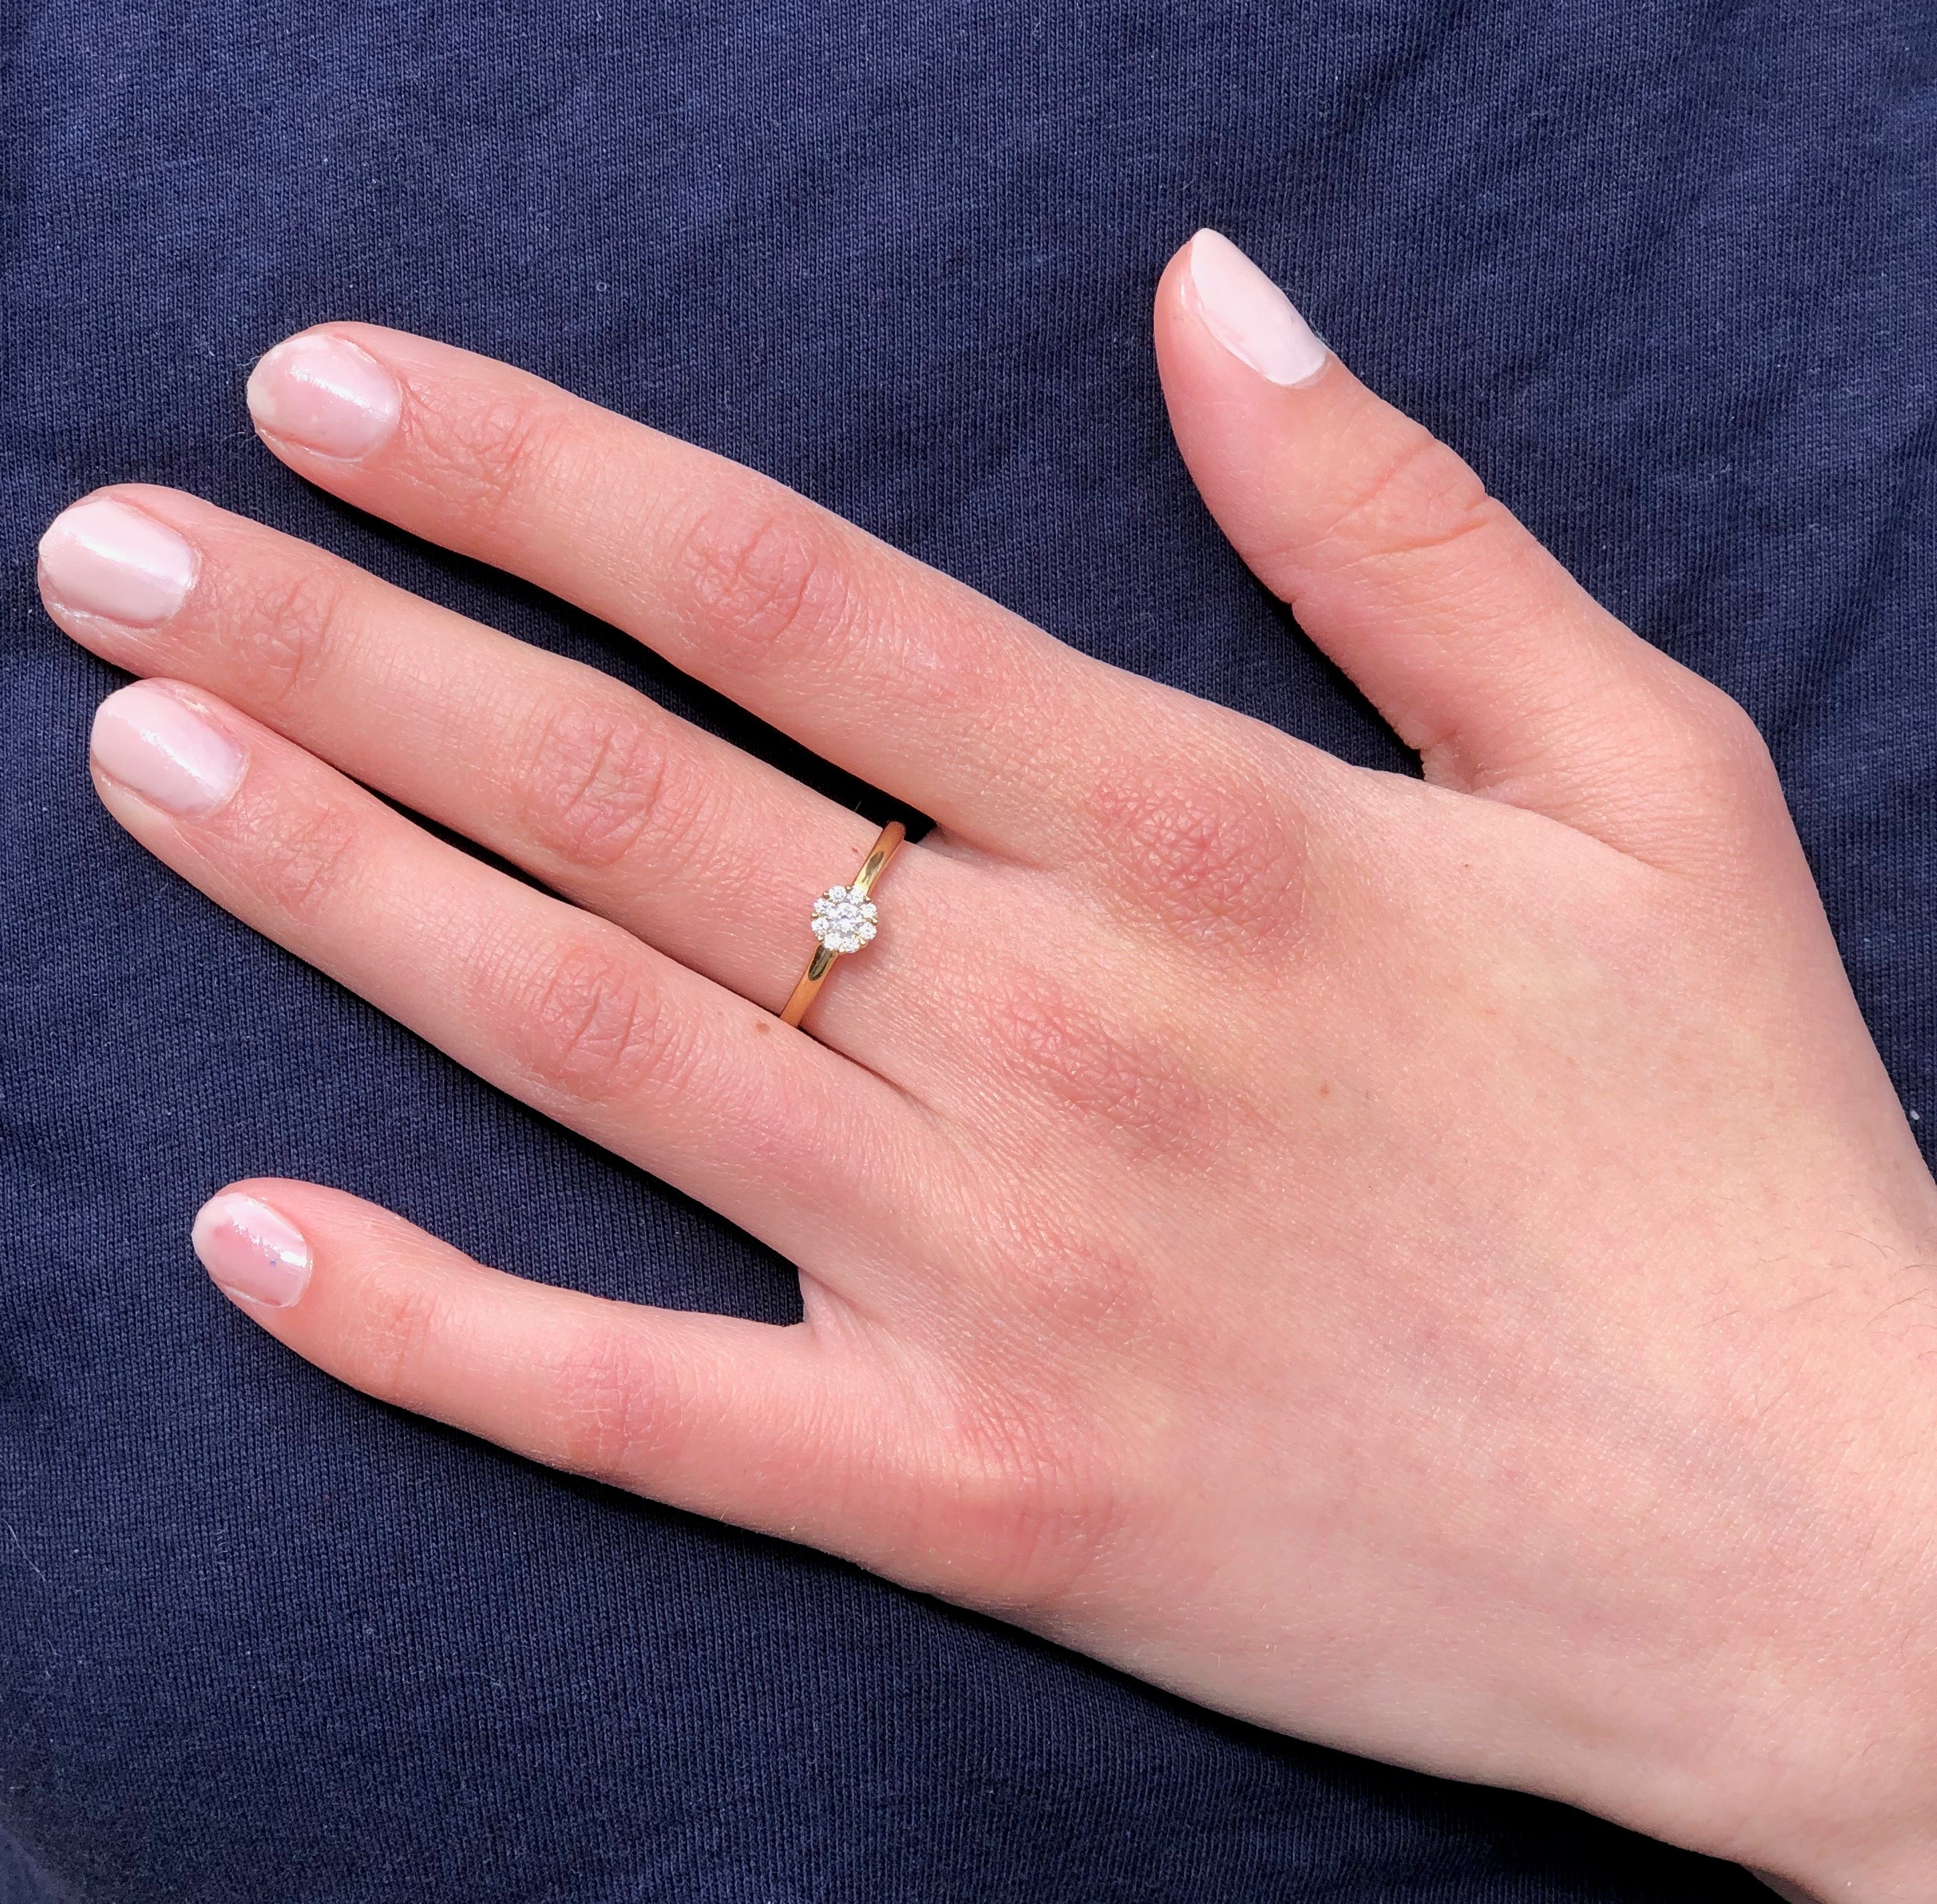 Yellow Gold Diamond Cluster Ring on Woman's Hand: A close-up view of a woman's hand elegantly displaying the timeless yellow gold ring adorned with a sparkling diamond cluster, highlighting its sophisticated beauty and charm.